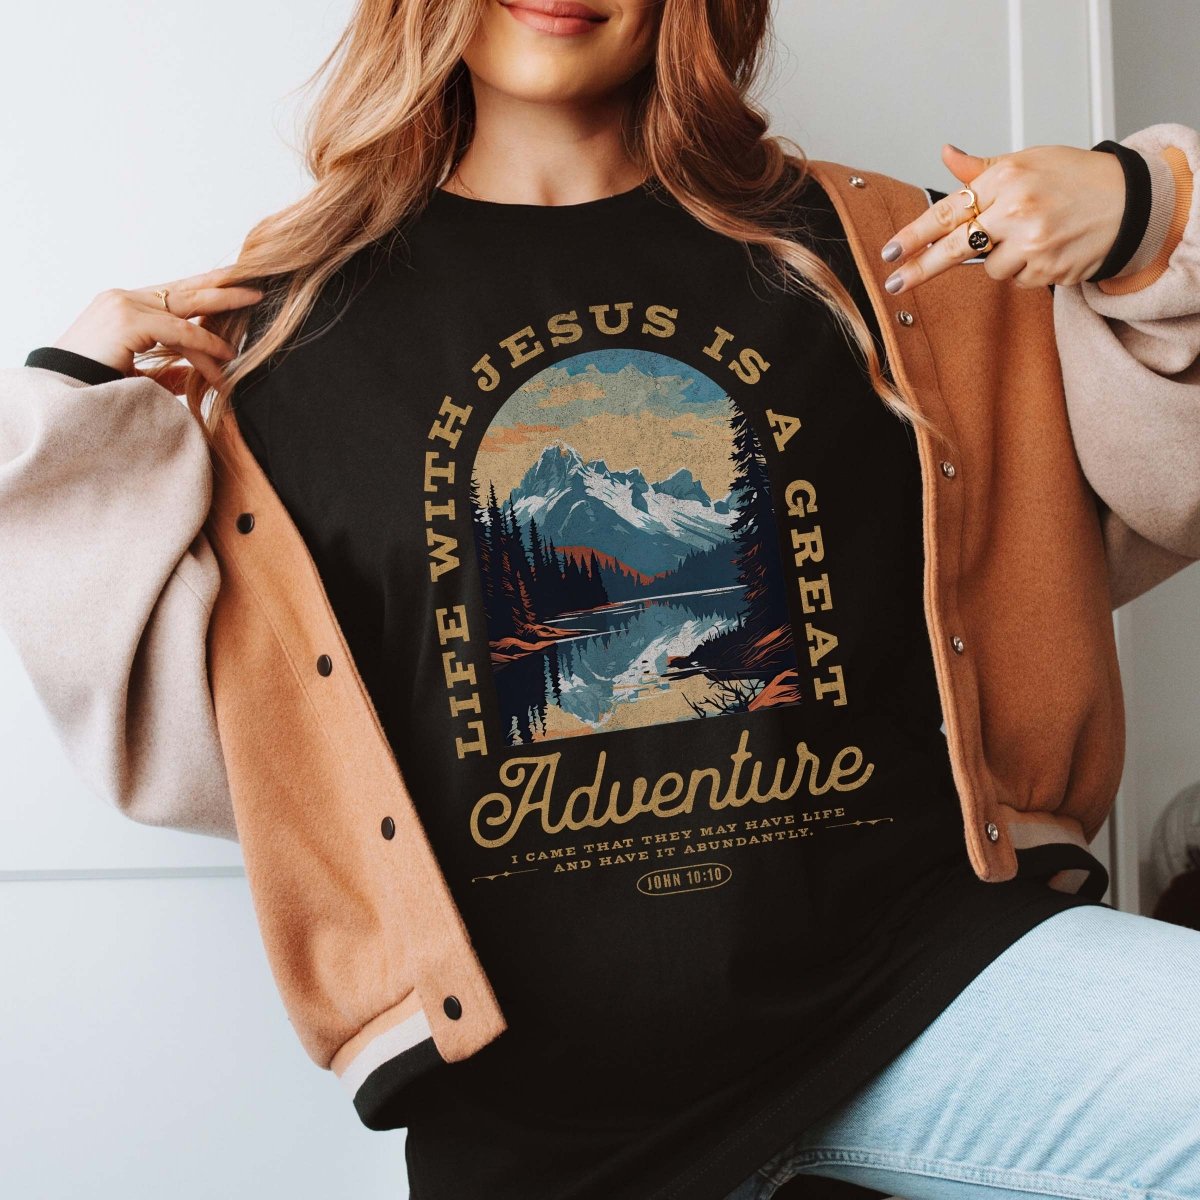 Life with Jesus is a Great Adventure Wholesale Tee - Limeberry Designs